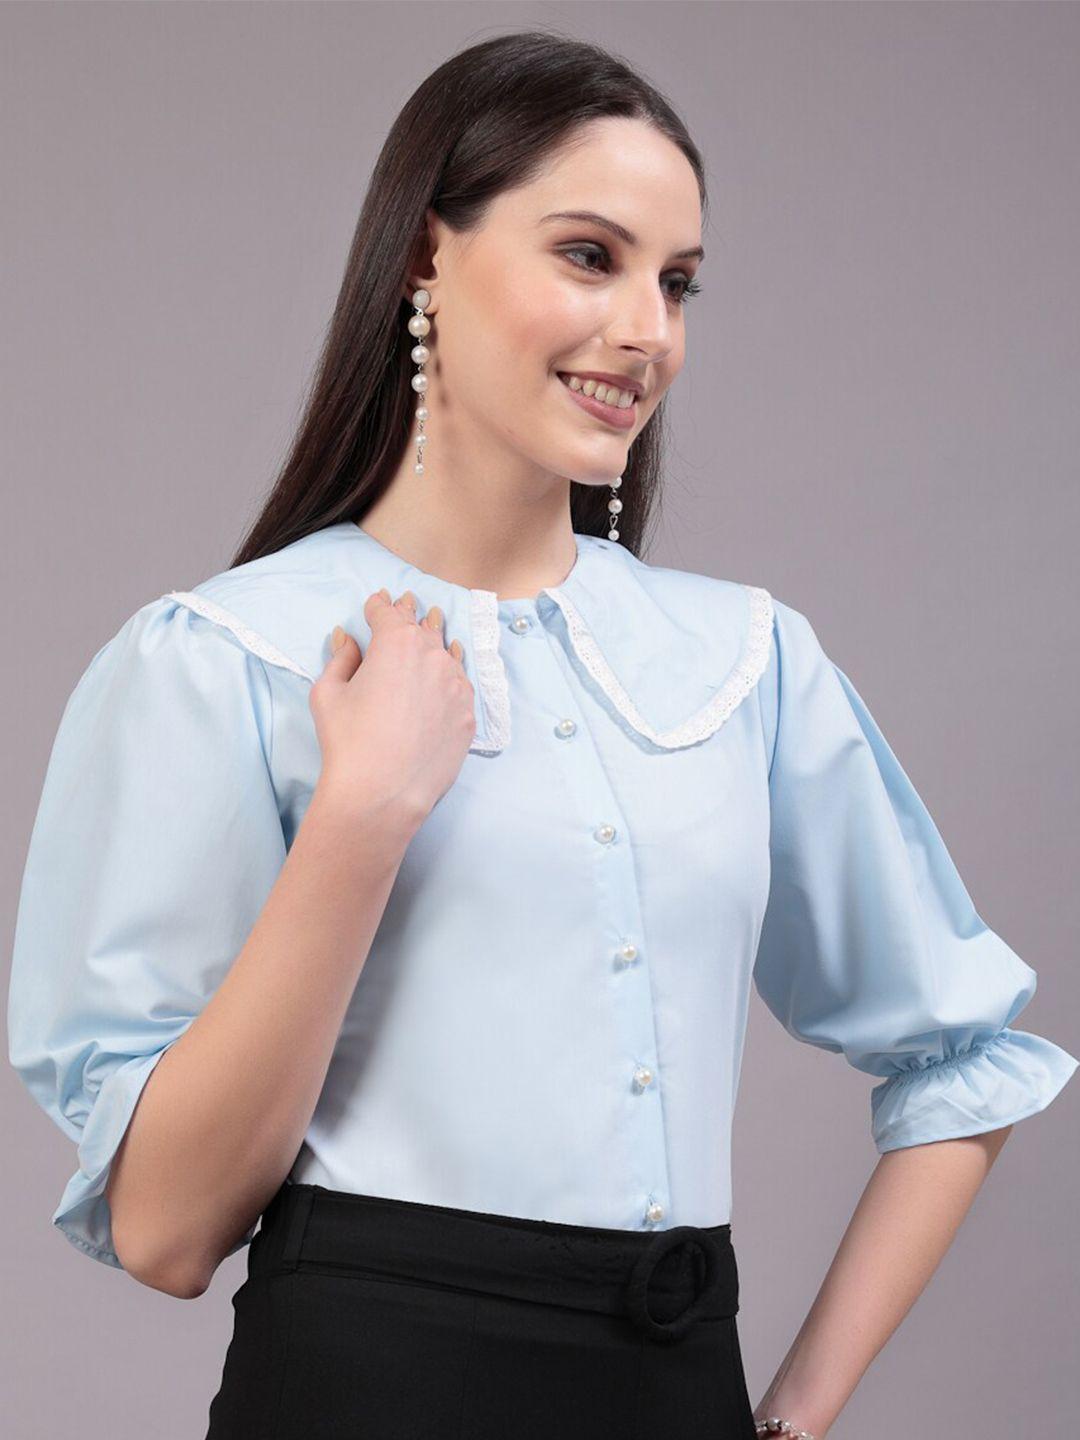 style-quotient-women-classic-opaque-formal-shirt